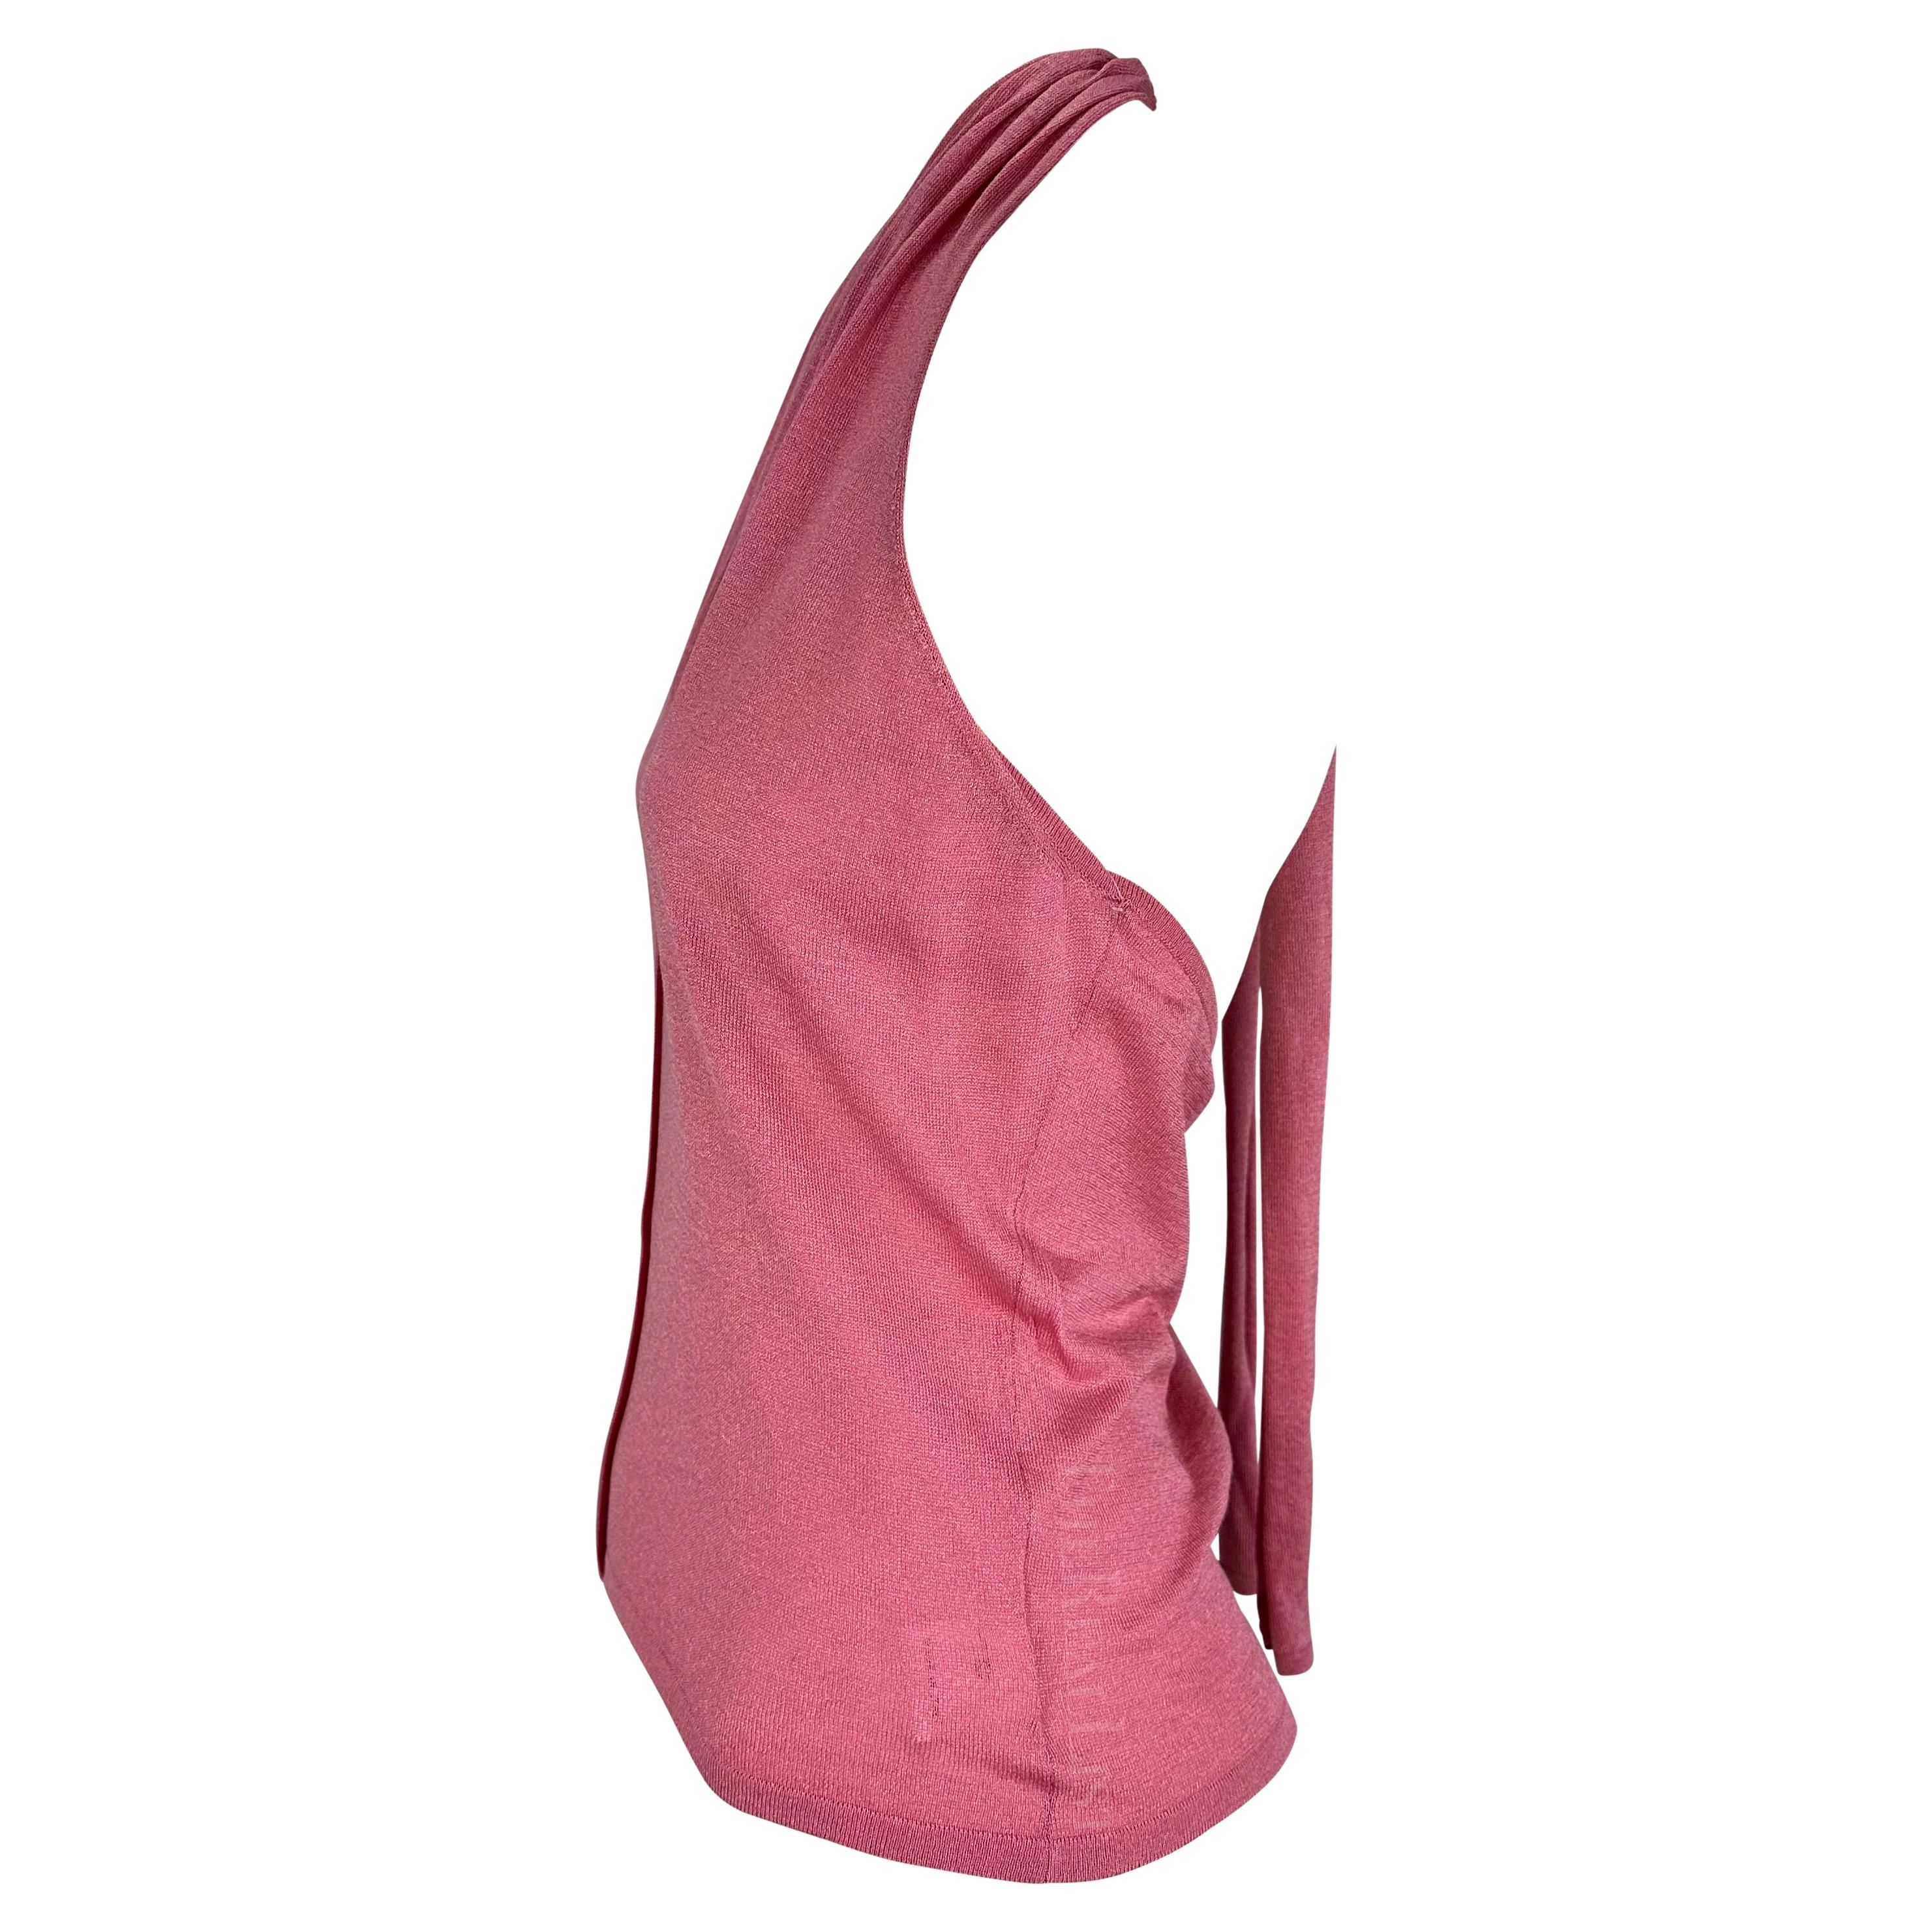 Presenting a fabulous bright pink Gucci knit halter top, designed by Tom Ford. From the late 1990s, this top features a v-neckline, exposed back, and tie at the neck. From over 20 years ago, this top is made complete with the original tags still